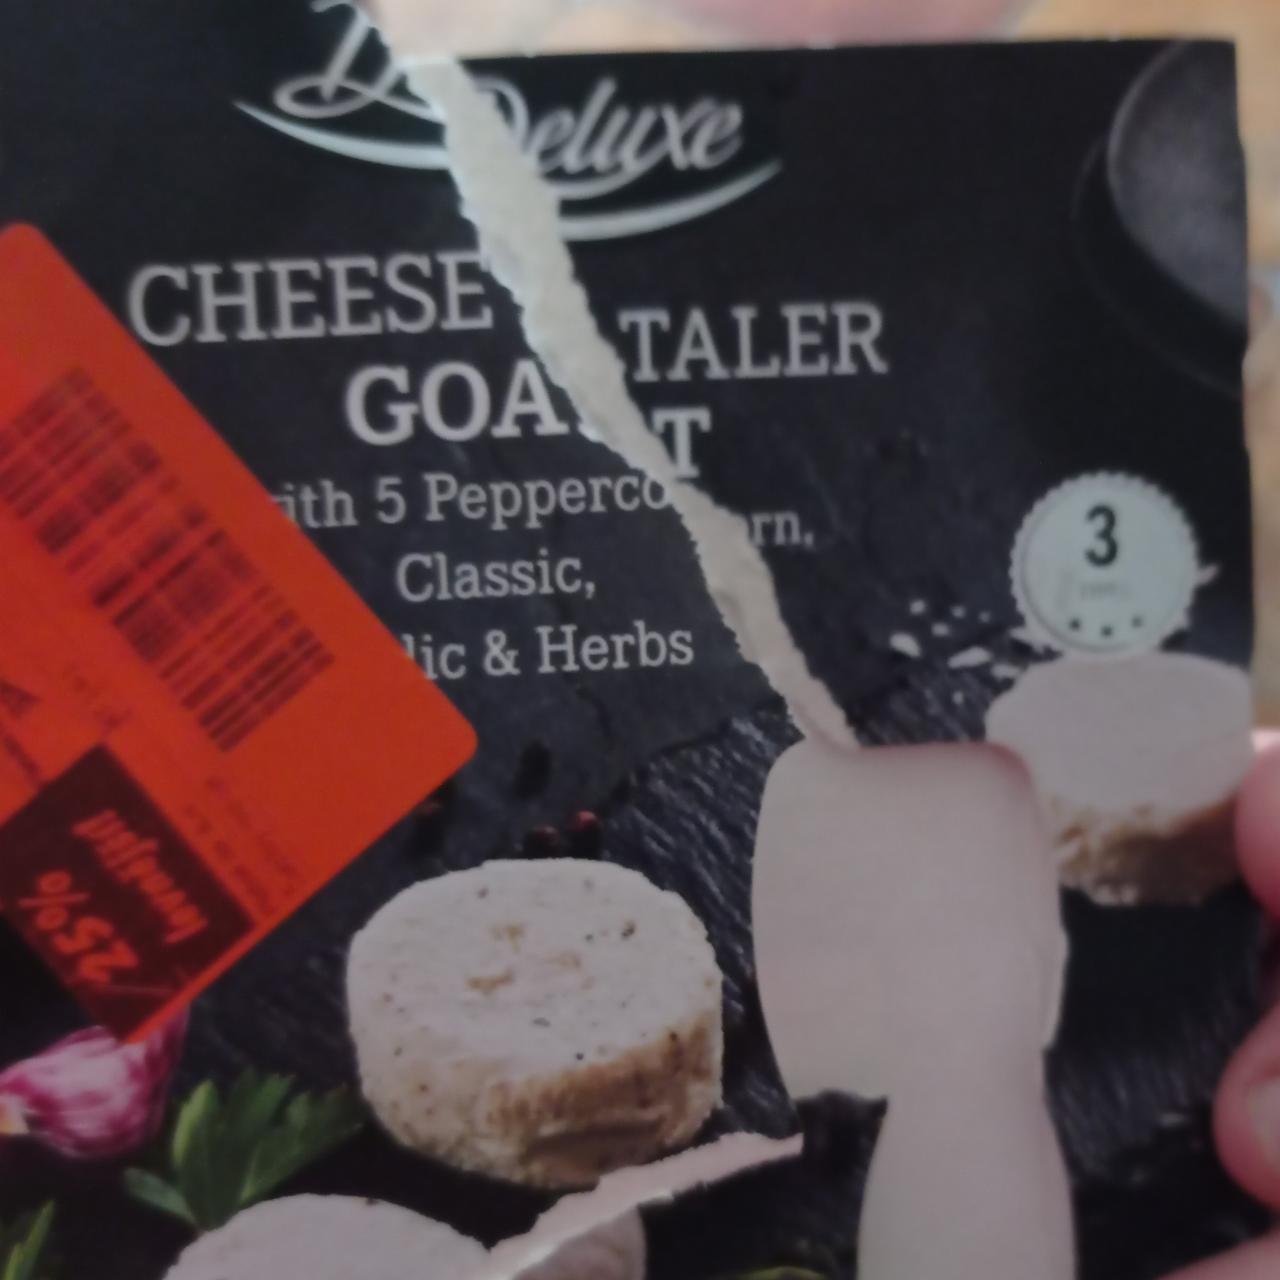 Fotografie - Cheese taler goat with Peppercorn, Classic, Garlic & Herbs Deluxe